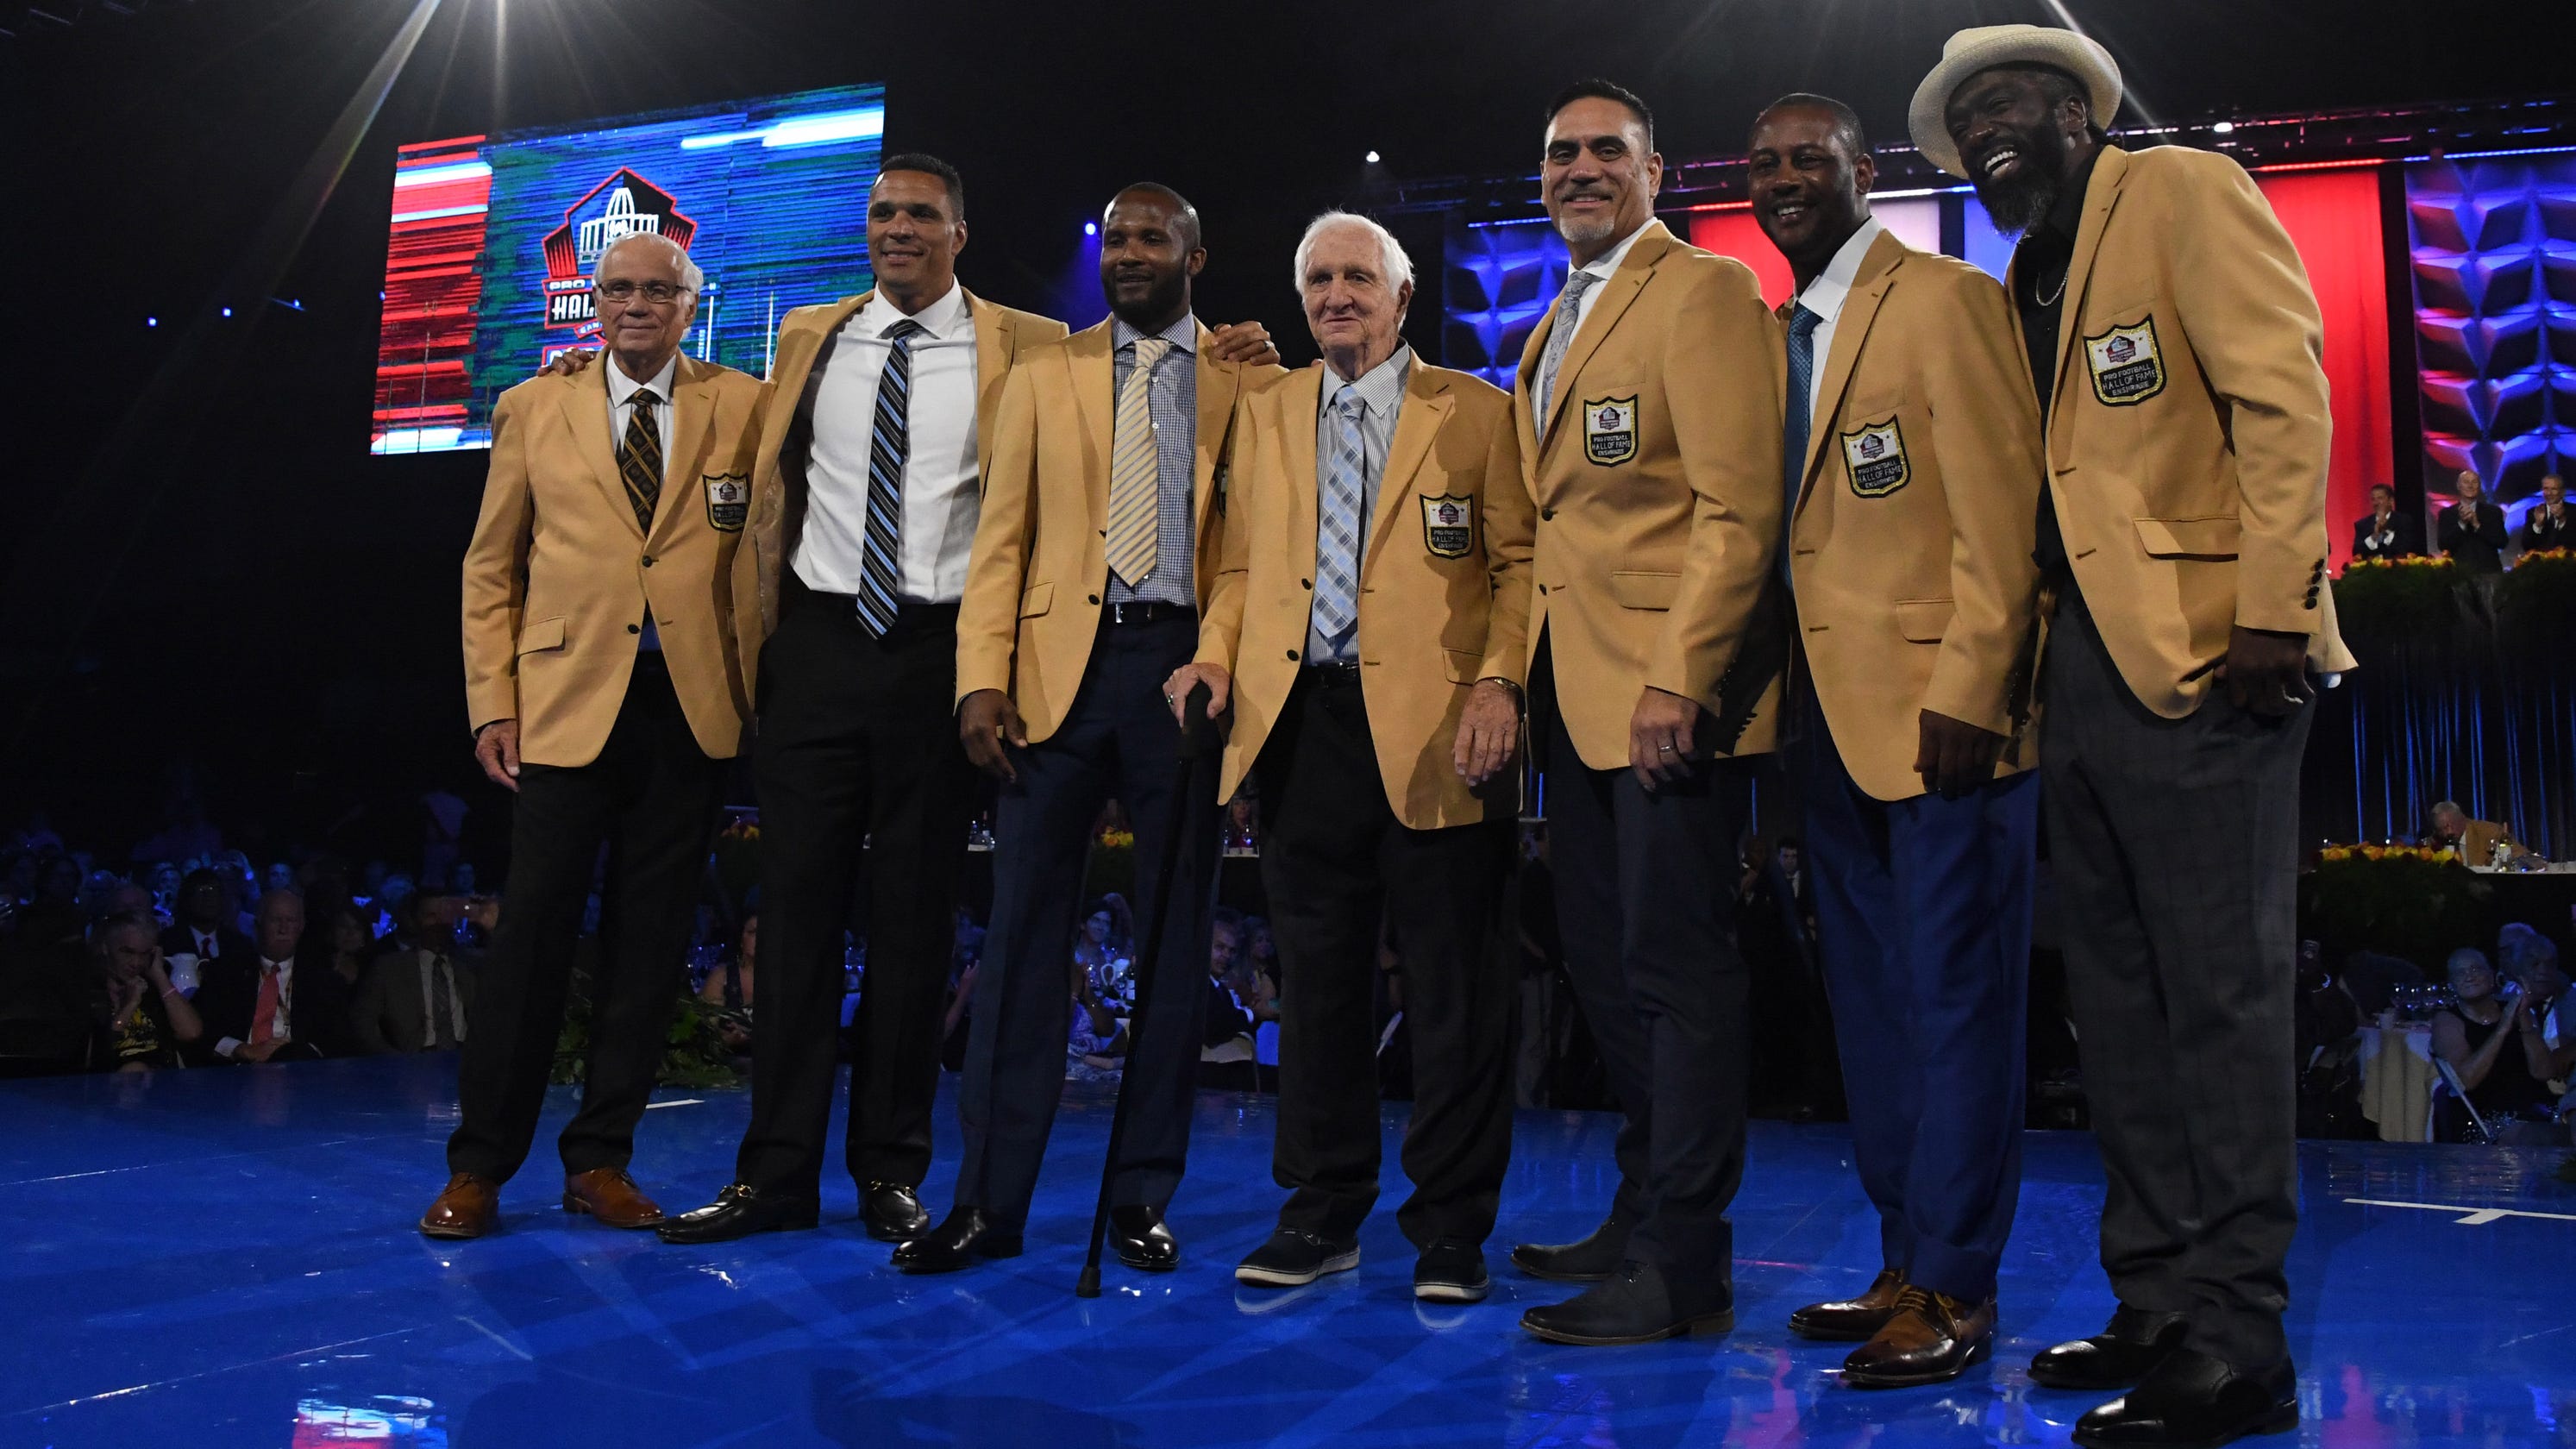 Highlights from the 2019 Pro Football Hall of Fame Speakers